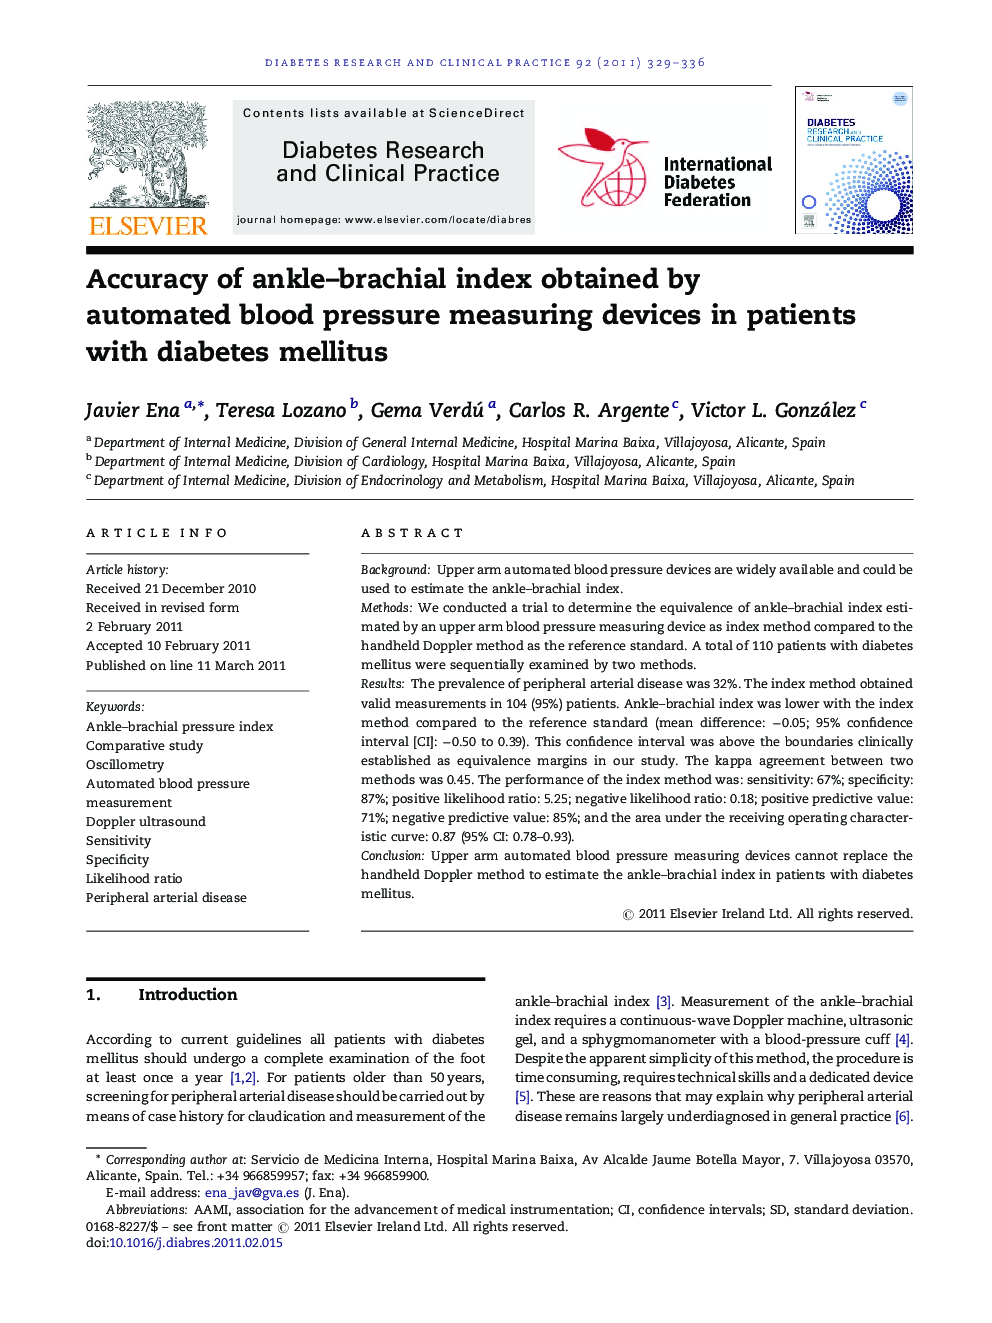 Accuracy of ankle–brachial index obtained by automated blood pressure measuring devices in patients with diabetes mellitus